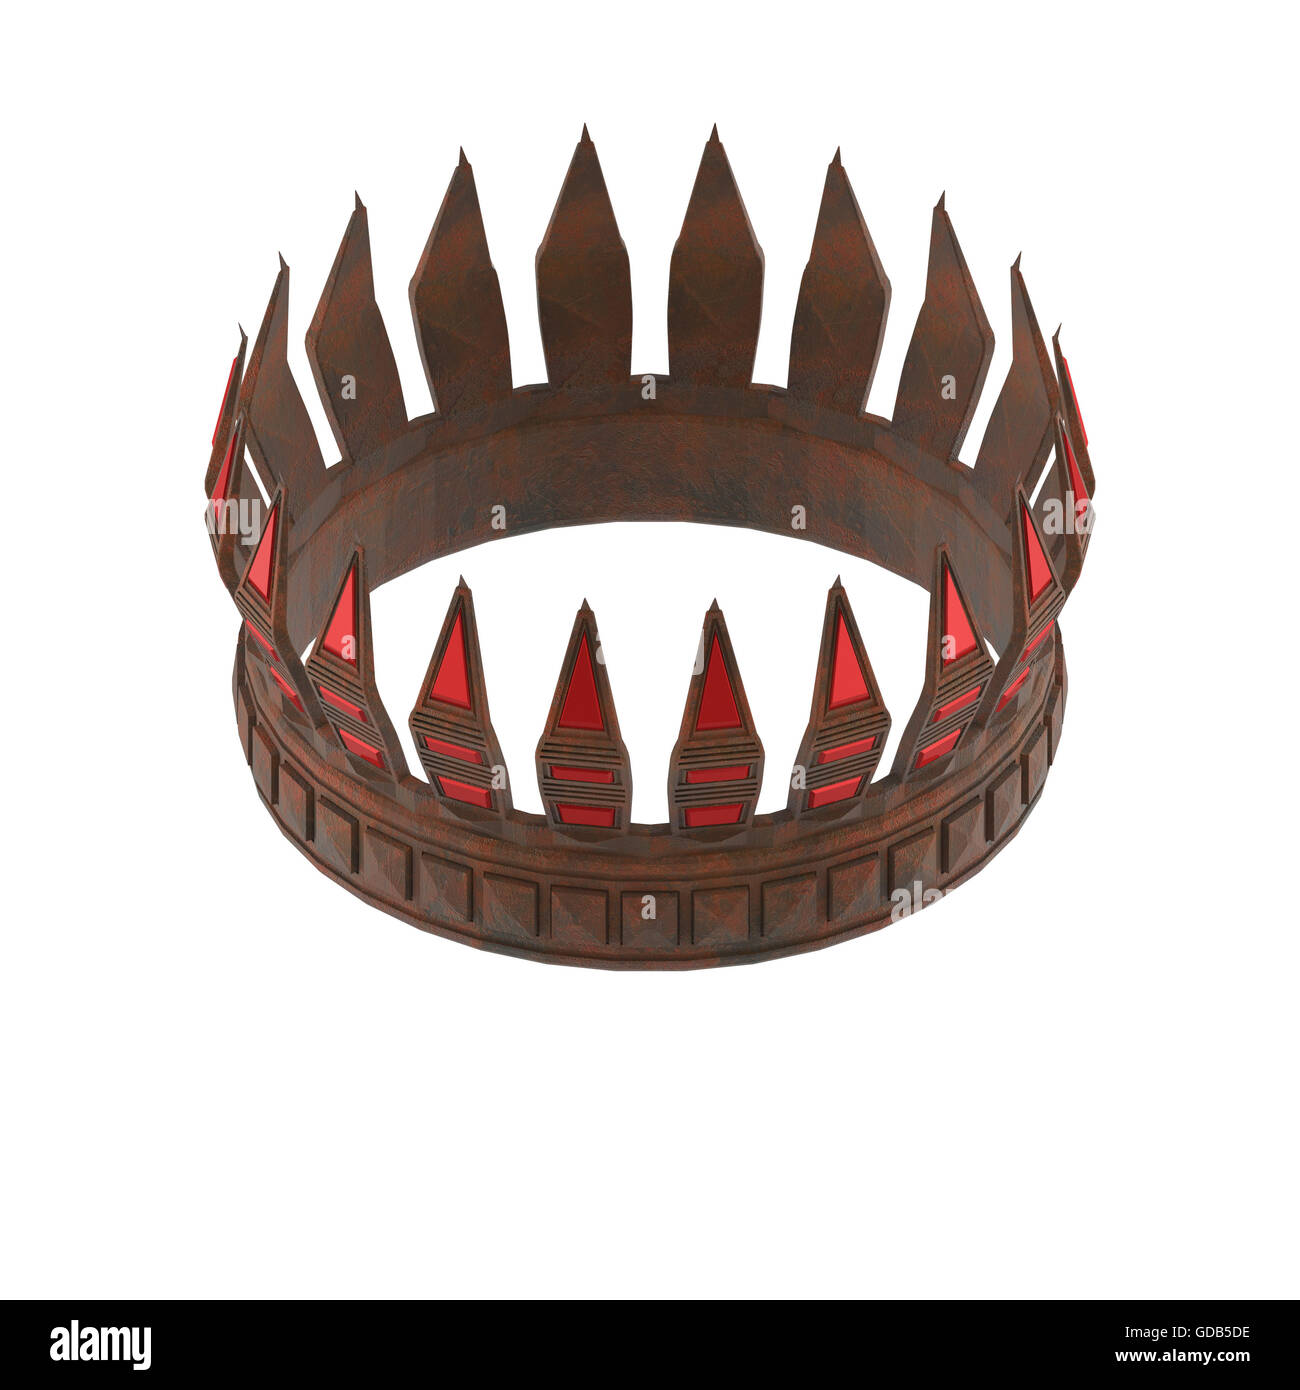 sharp spike metal crown 3d render isolated Stock Photo